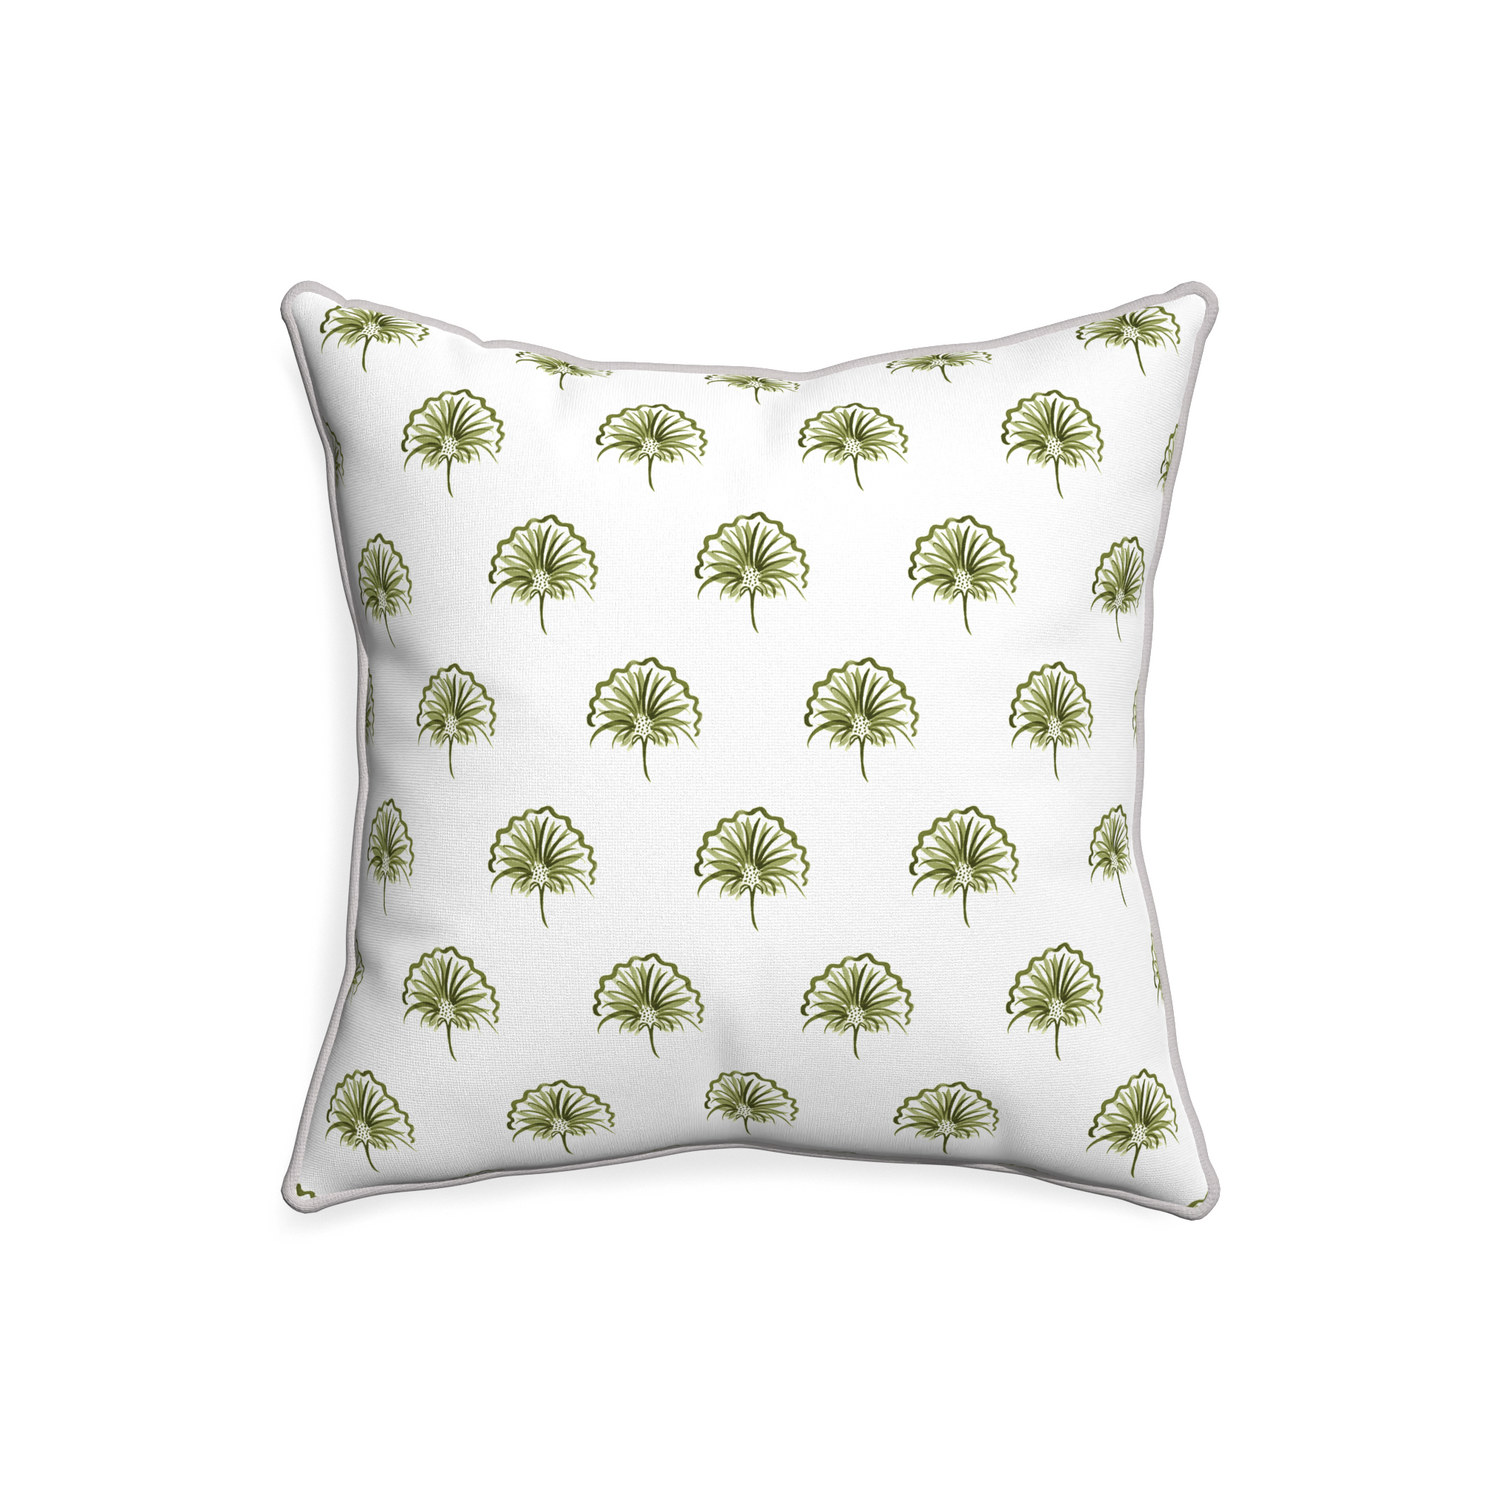 20-square penelope moss custom green floralpillow with pebble piping on white background